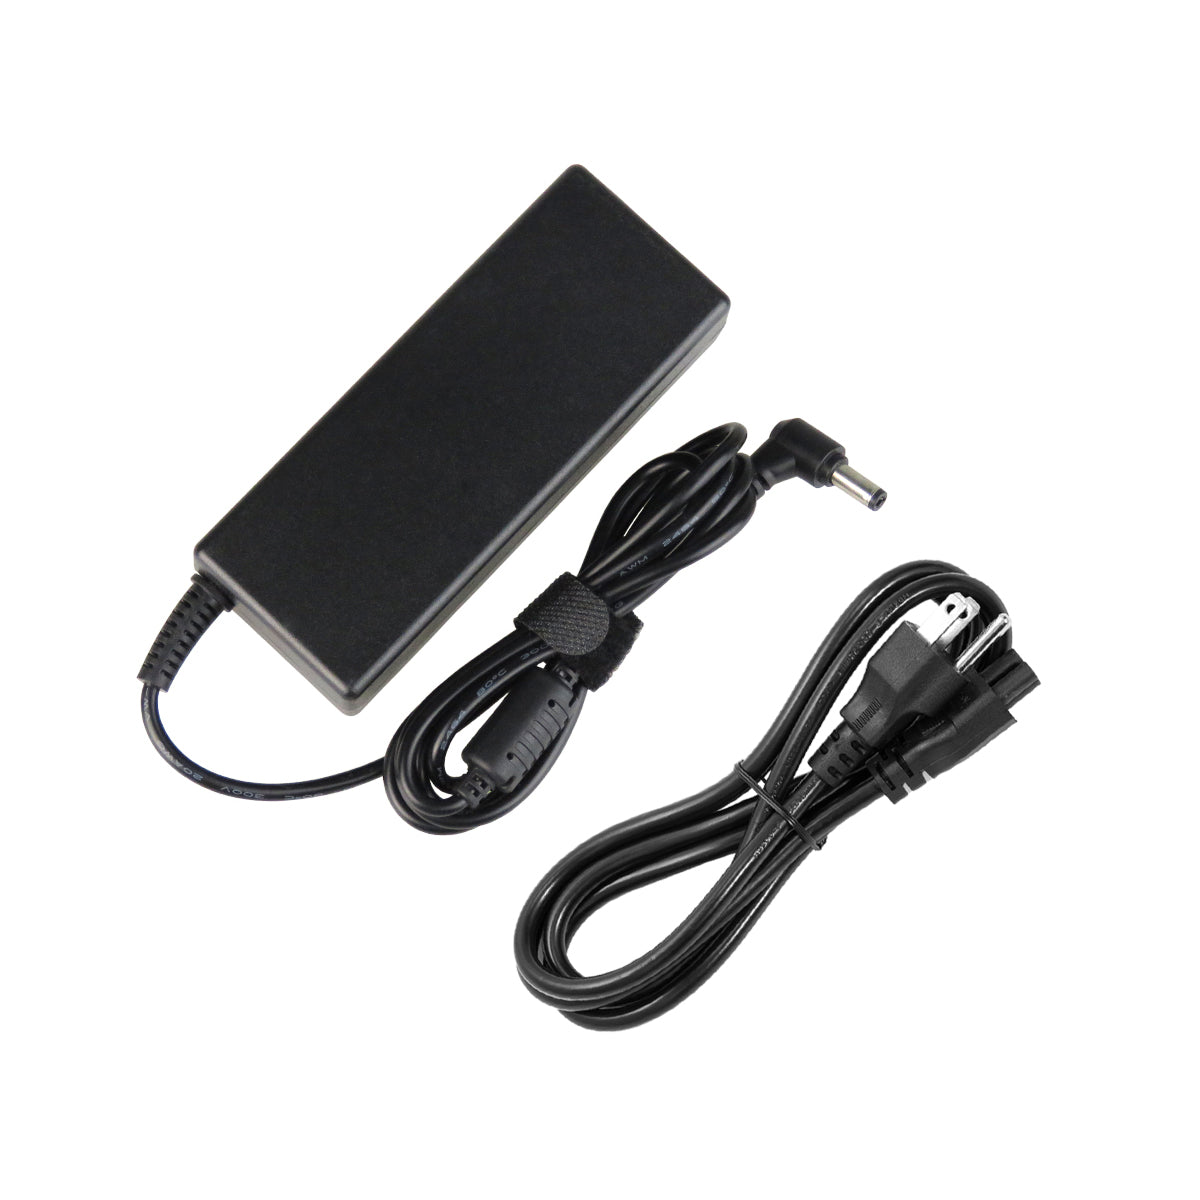 AC Adapter Charger for ASUS K73SJ Notebook.